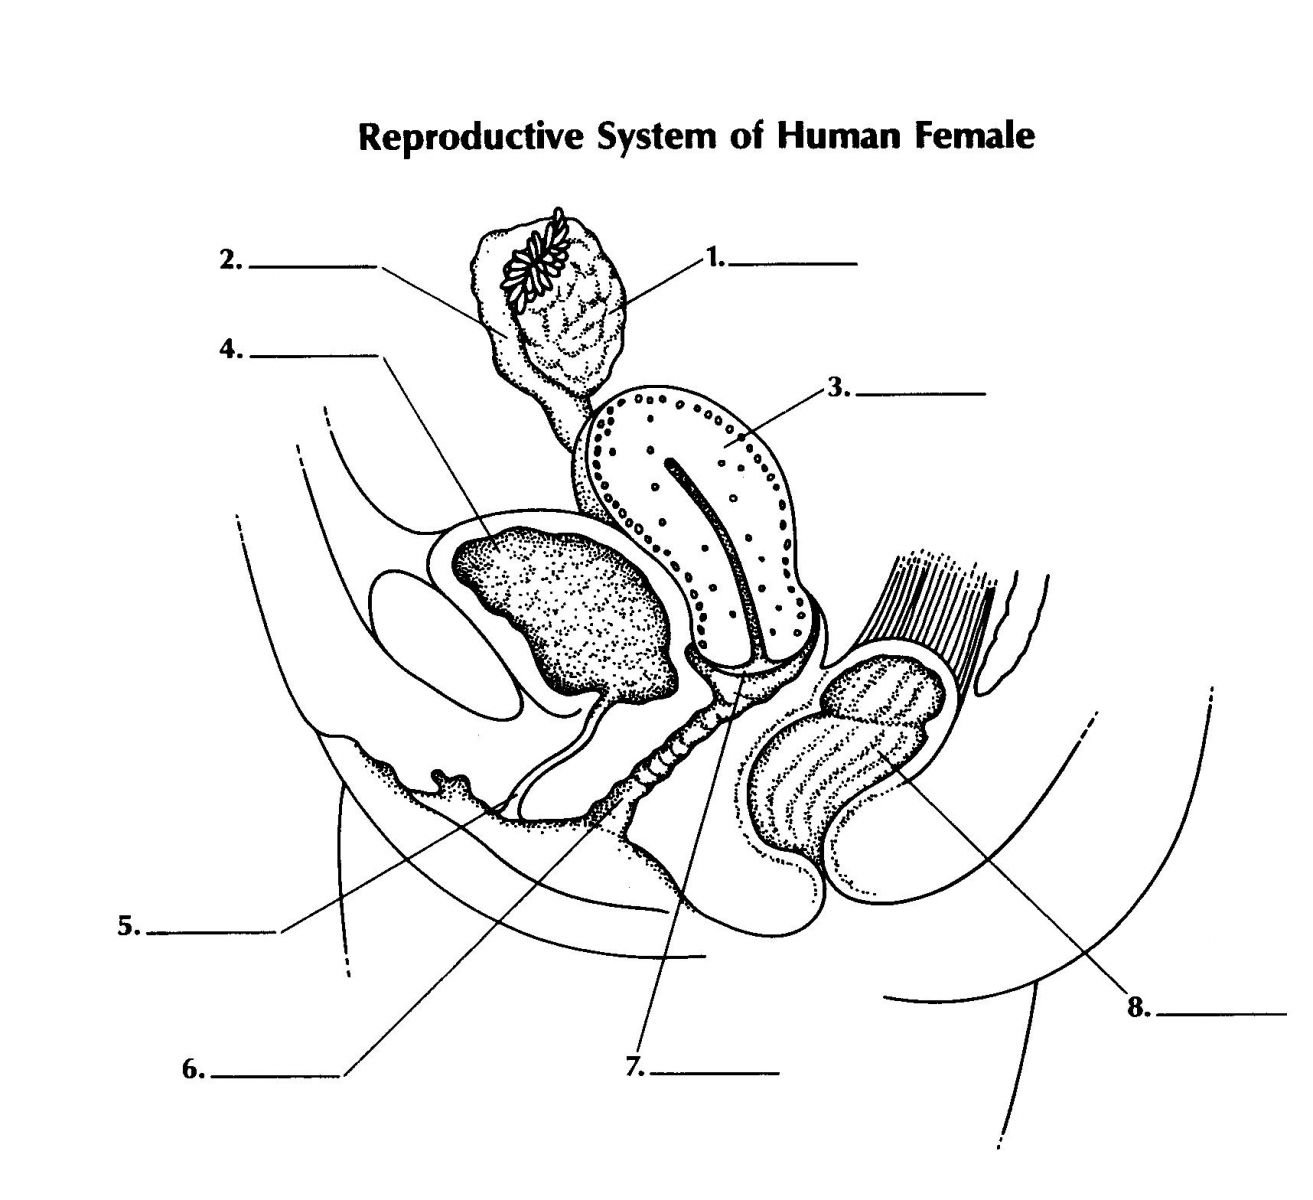 What are some of the parts of the female reproductive system?